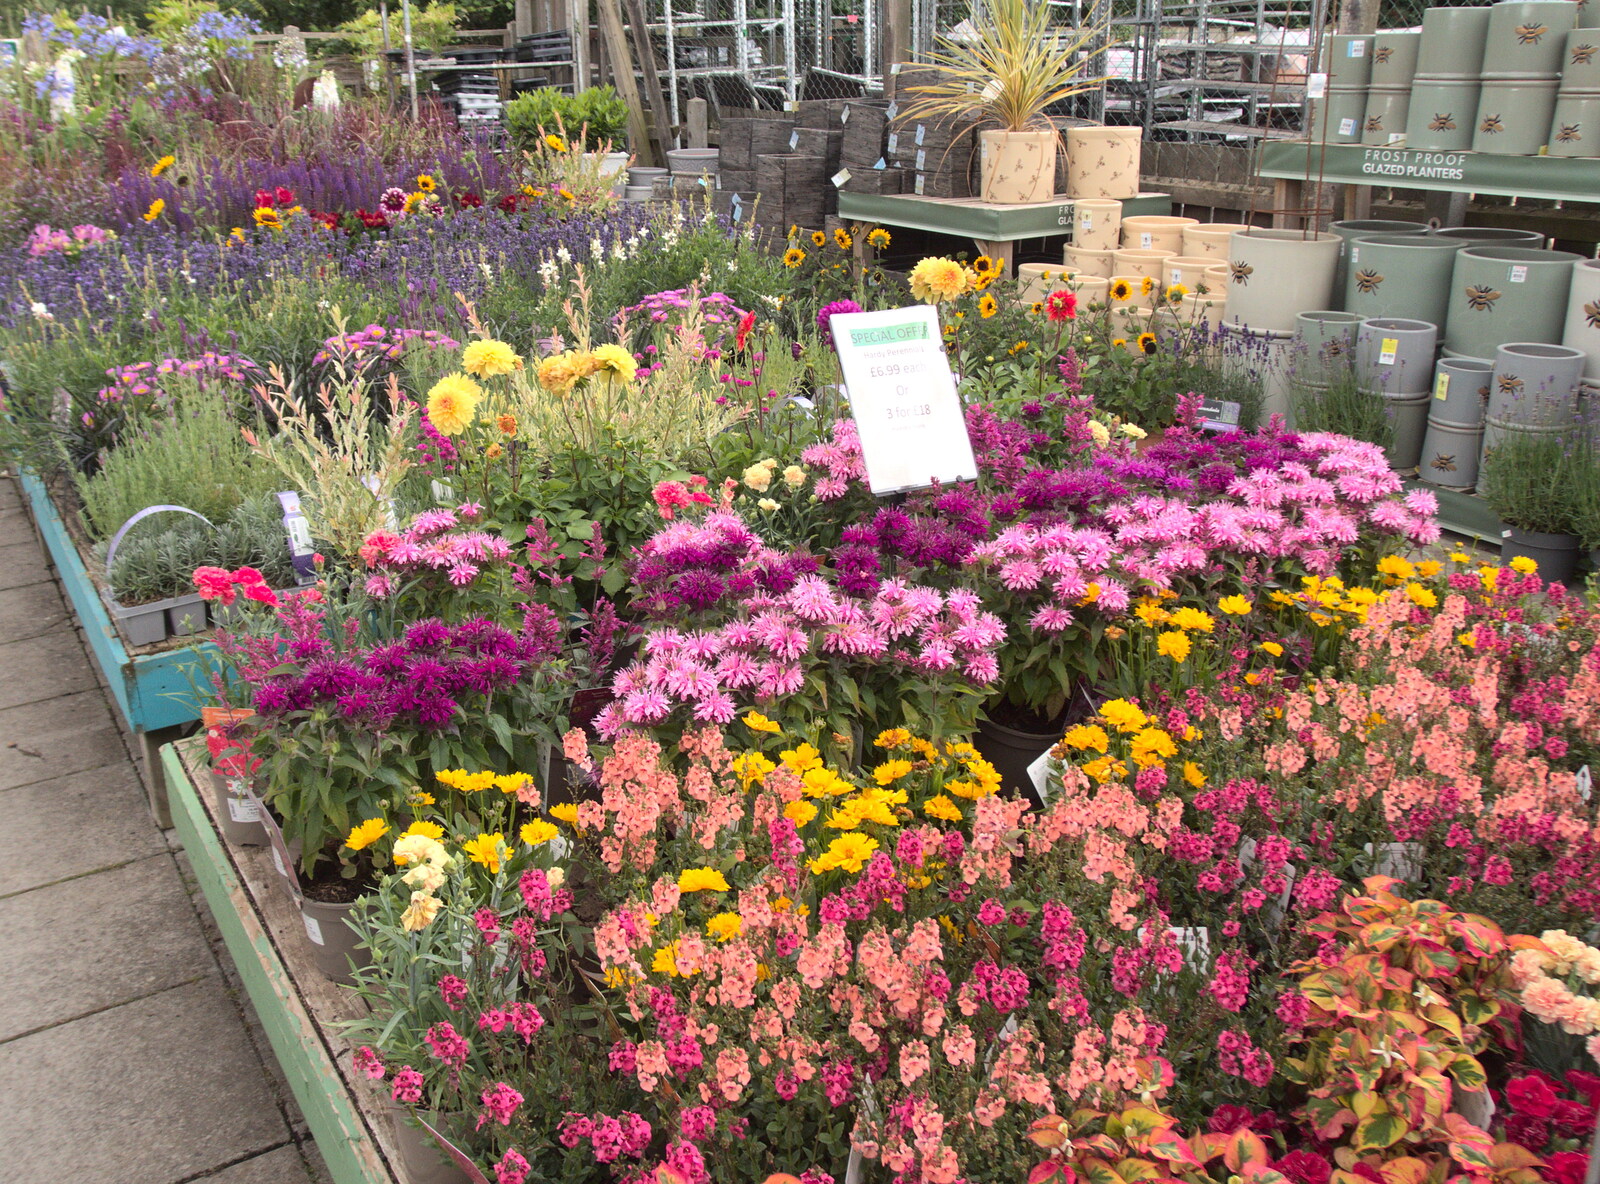 Diss Garden Centre's summer flowers in full flow from Camping in the Dunes, Waxham Sands, Norfolk - 9th July 2022